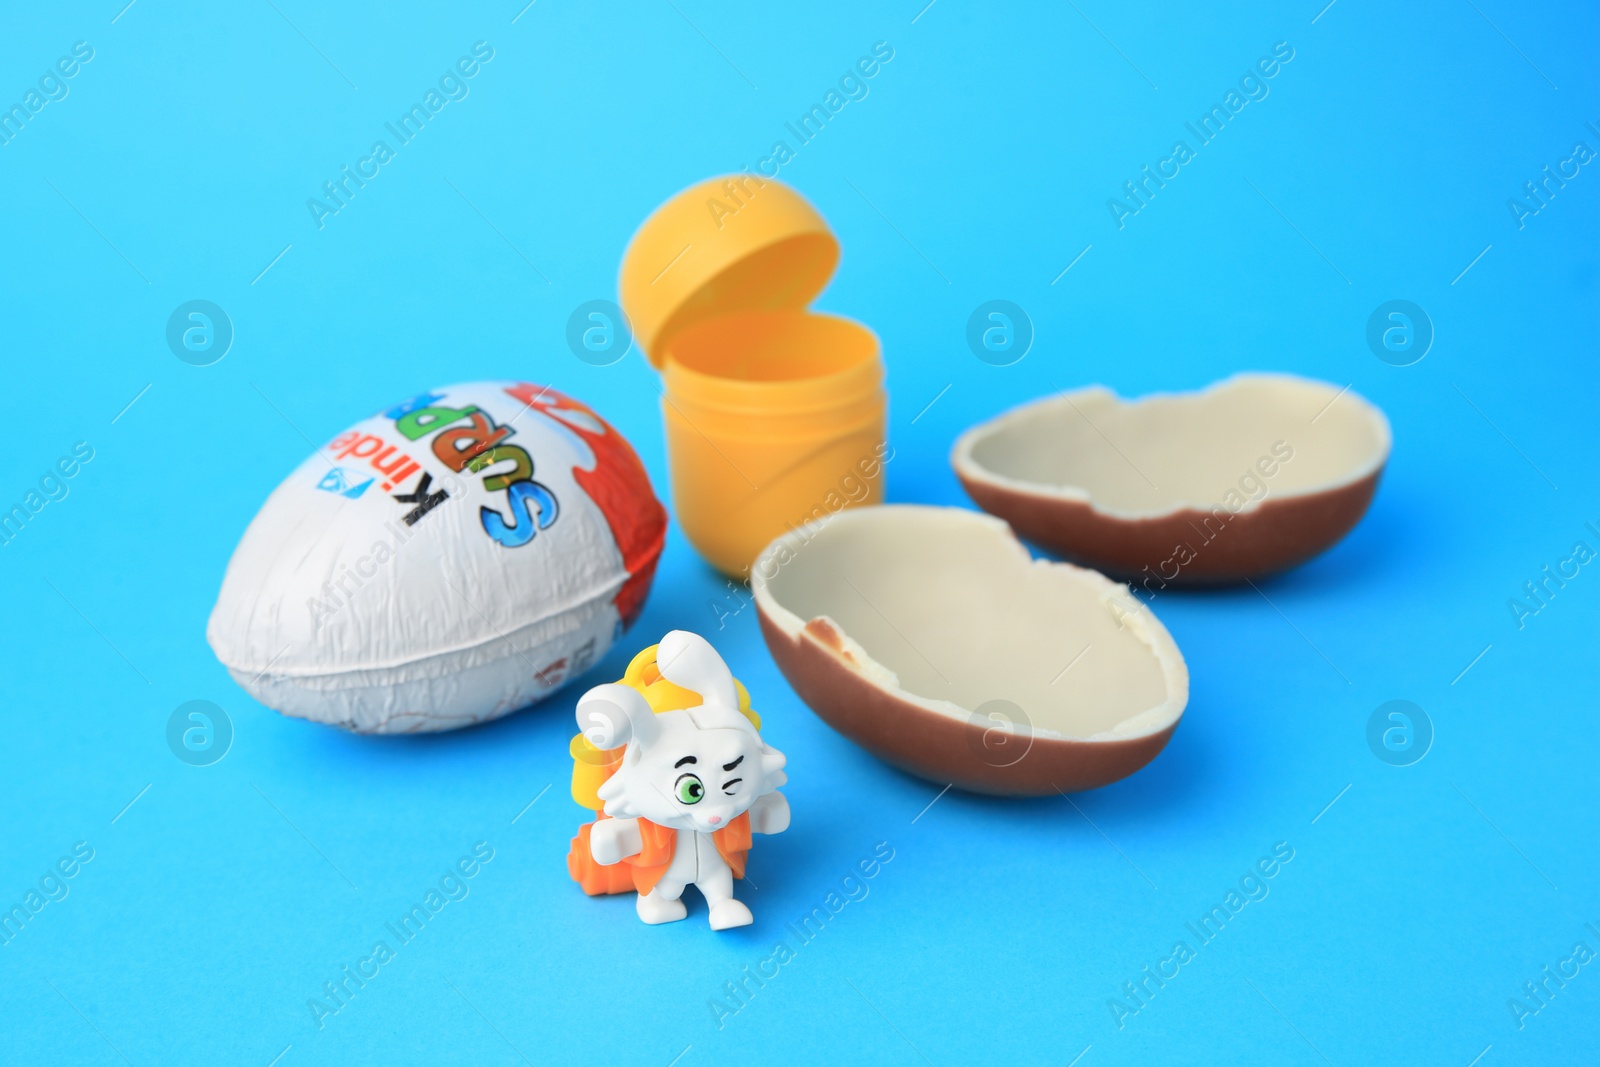 Photo of Slynchev Bryag, Bulgaria - May 25, 2023: Kinder Surprise Eggs, plastic capsule and toy bunny on light blue background